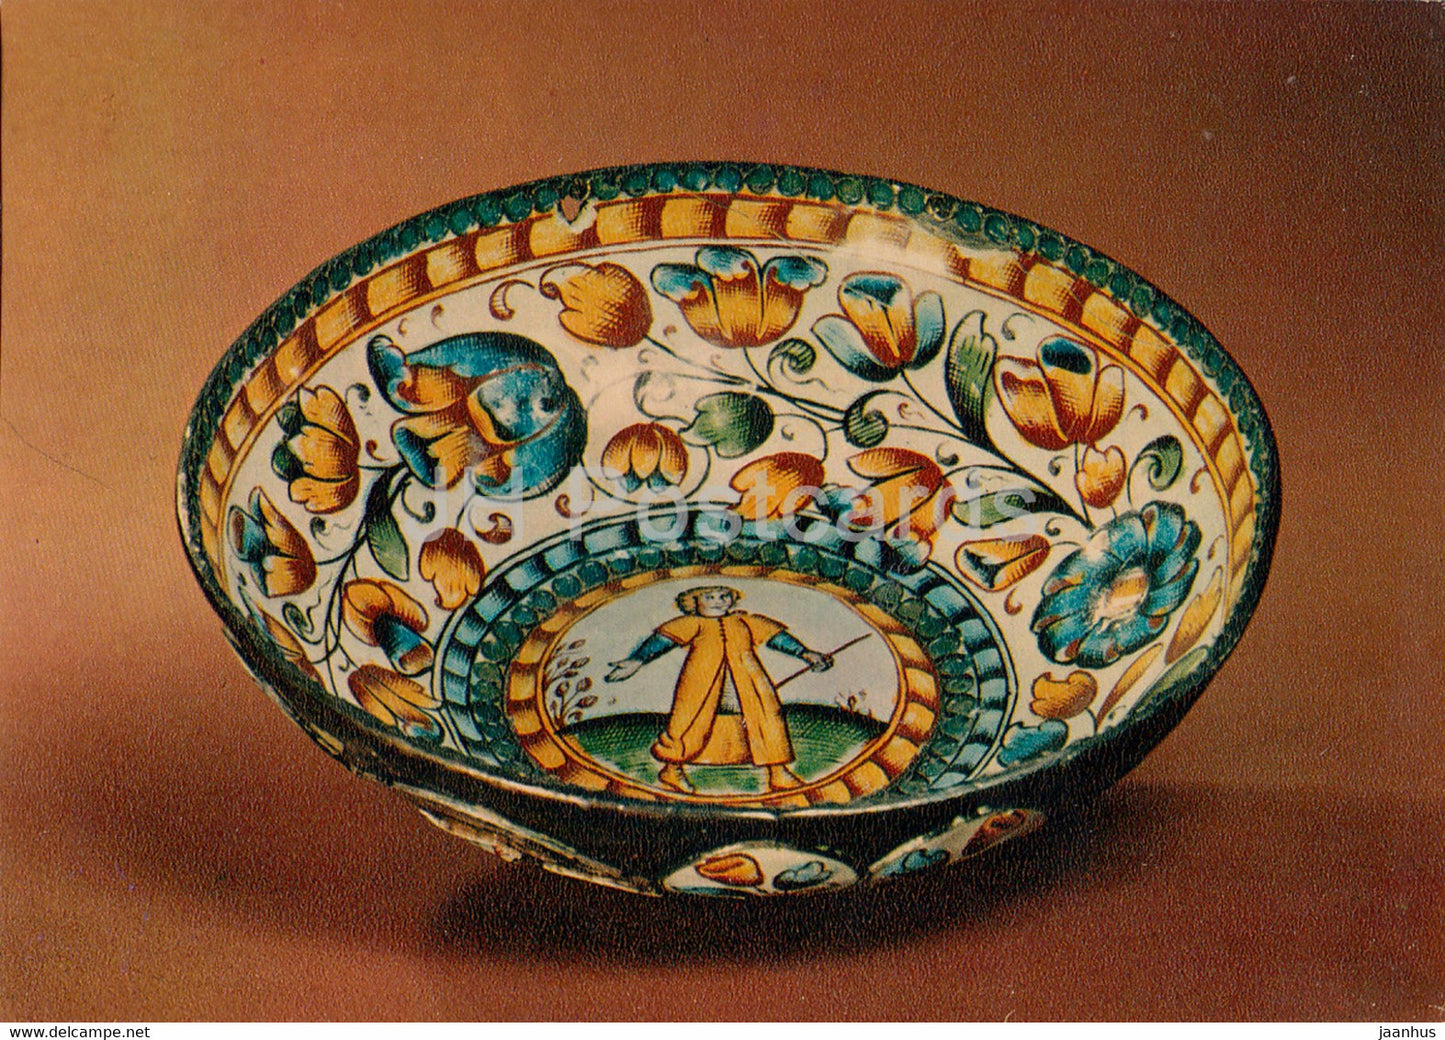 A Bowl - Applied Art in Moscow Kremlin Museum - 1978 - Russia USSR - unused - JH Postcards